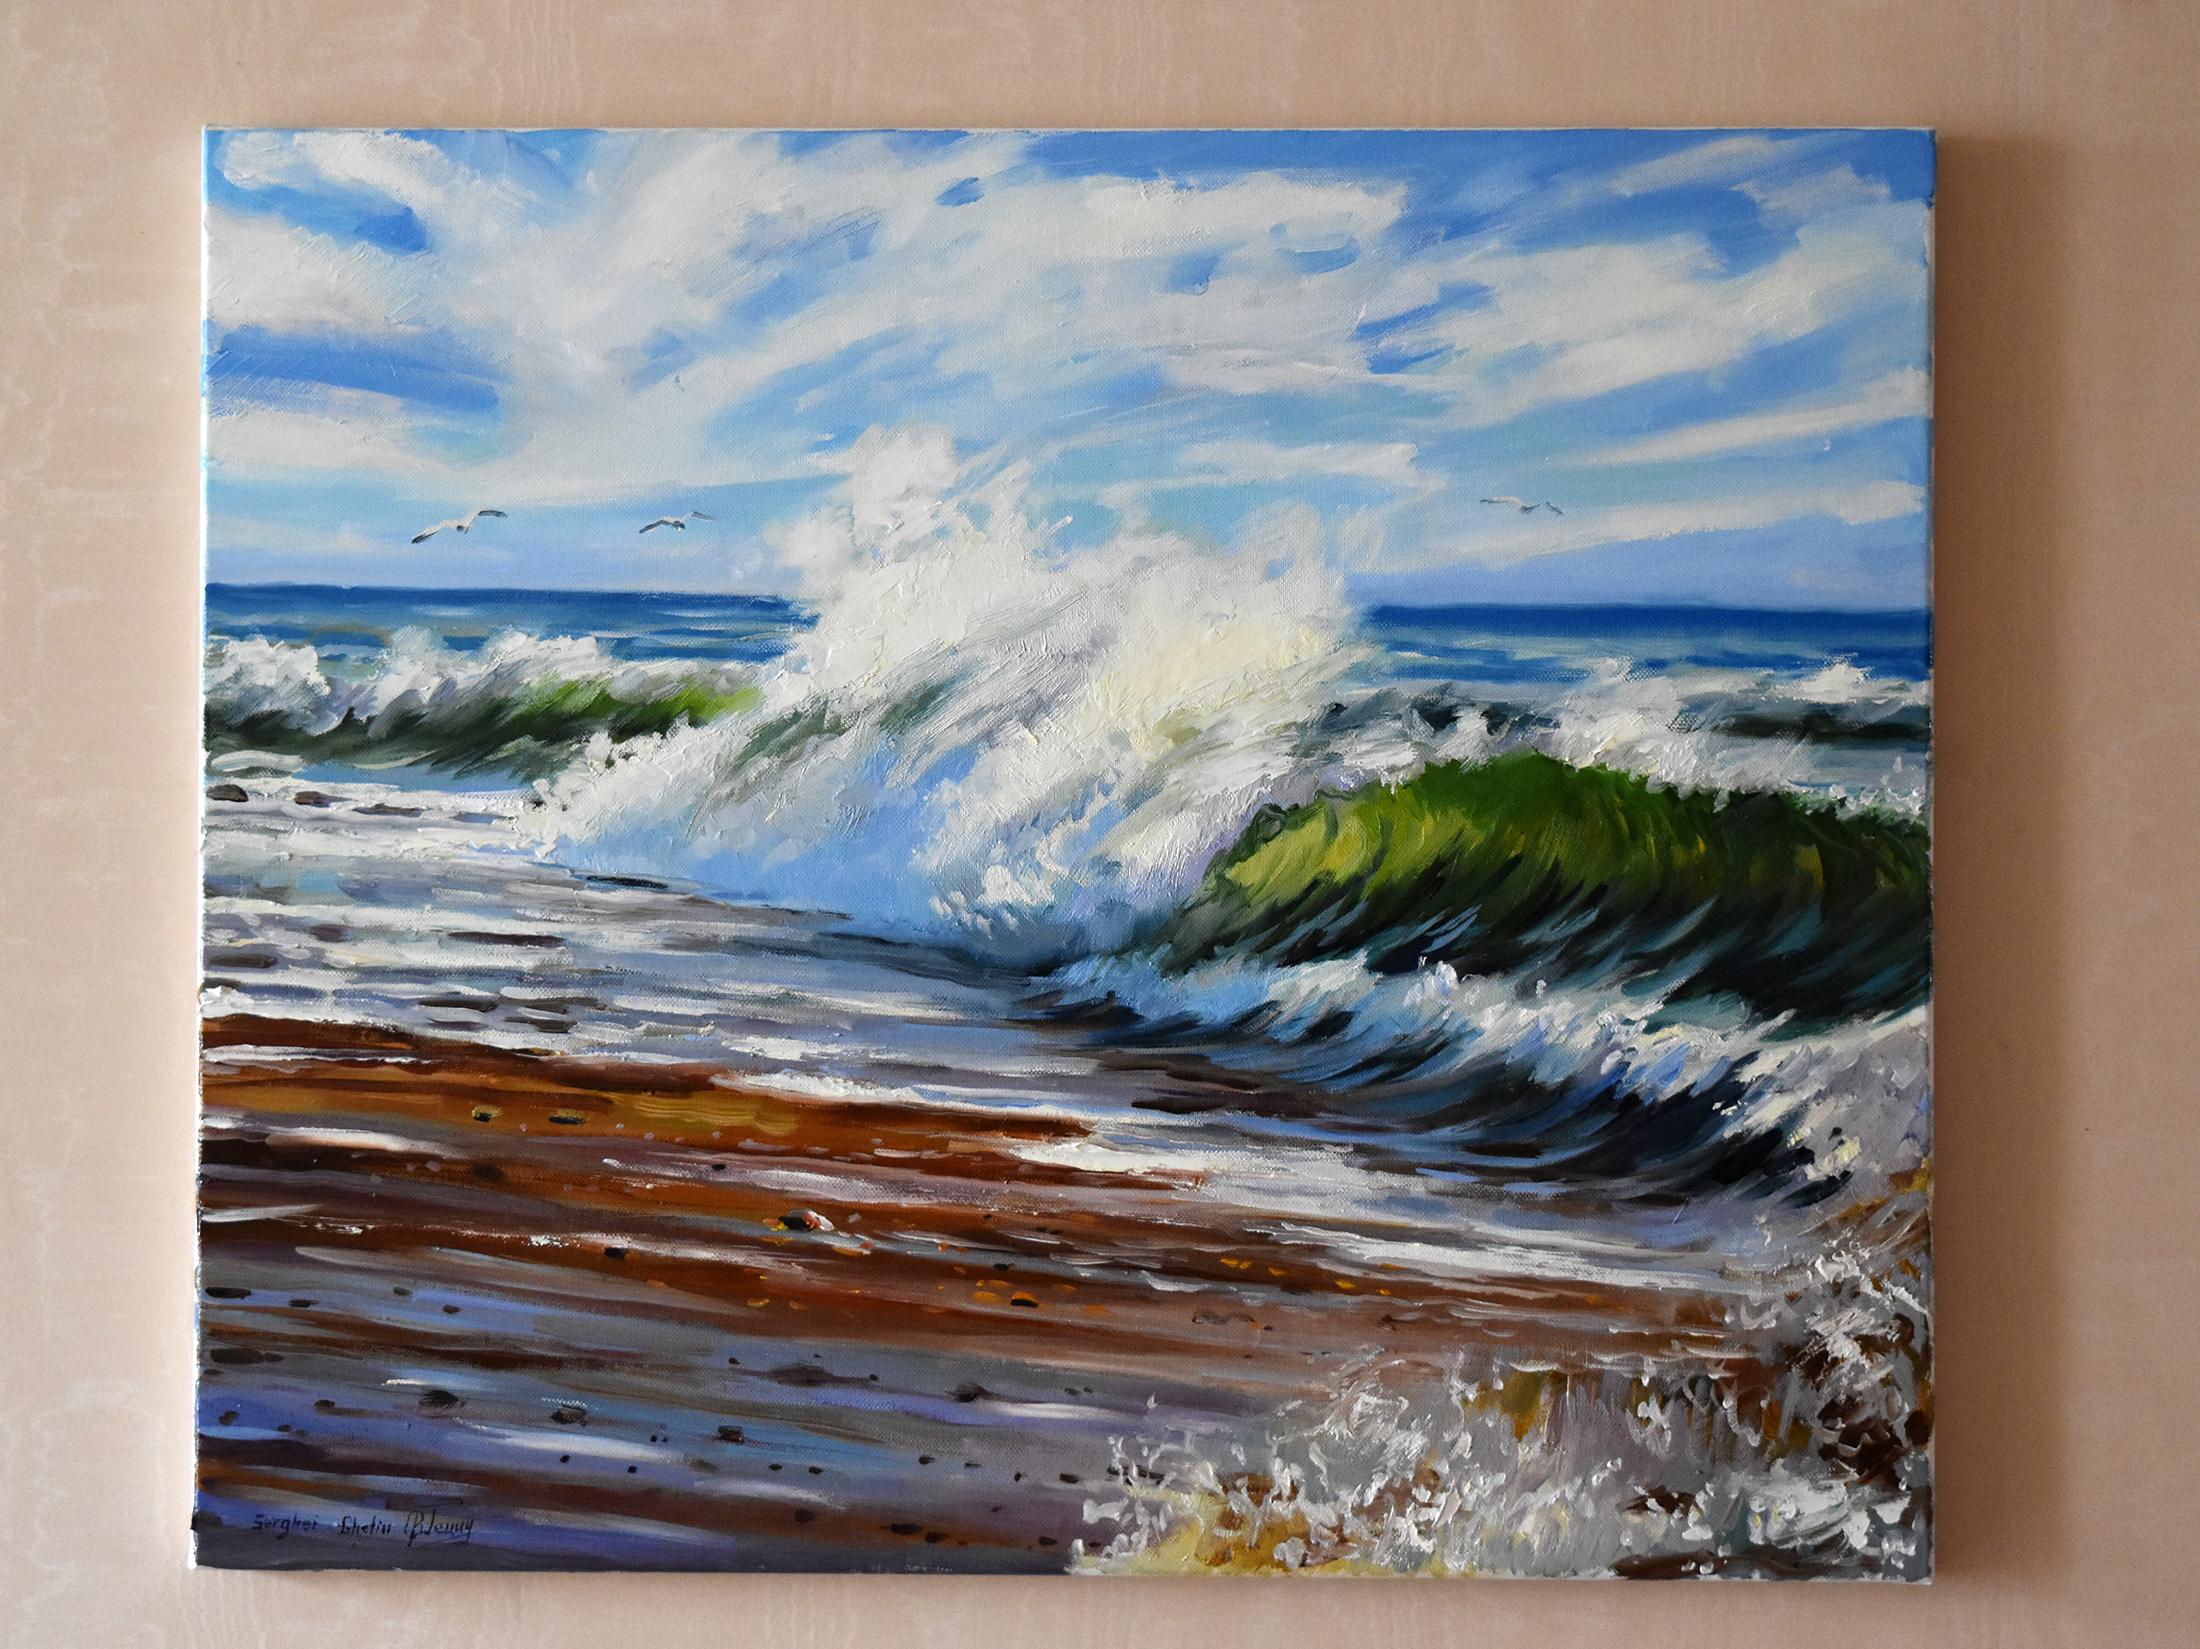 The crazy stormy sea - Impressionist Painting by Serghei Ghetiu